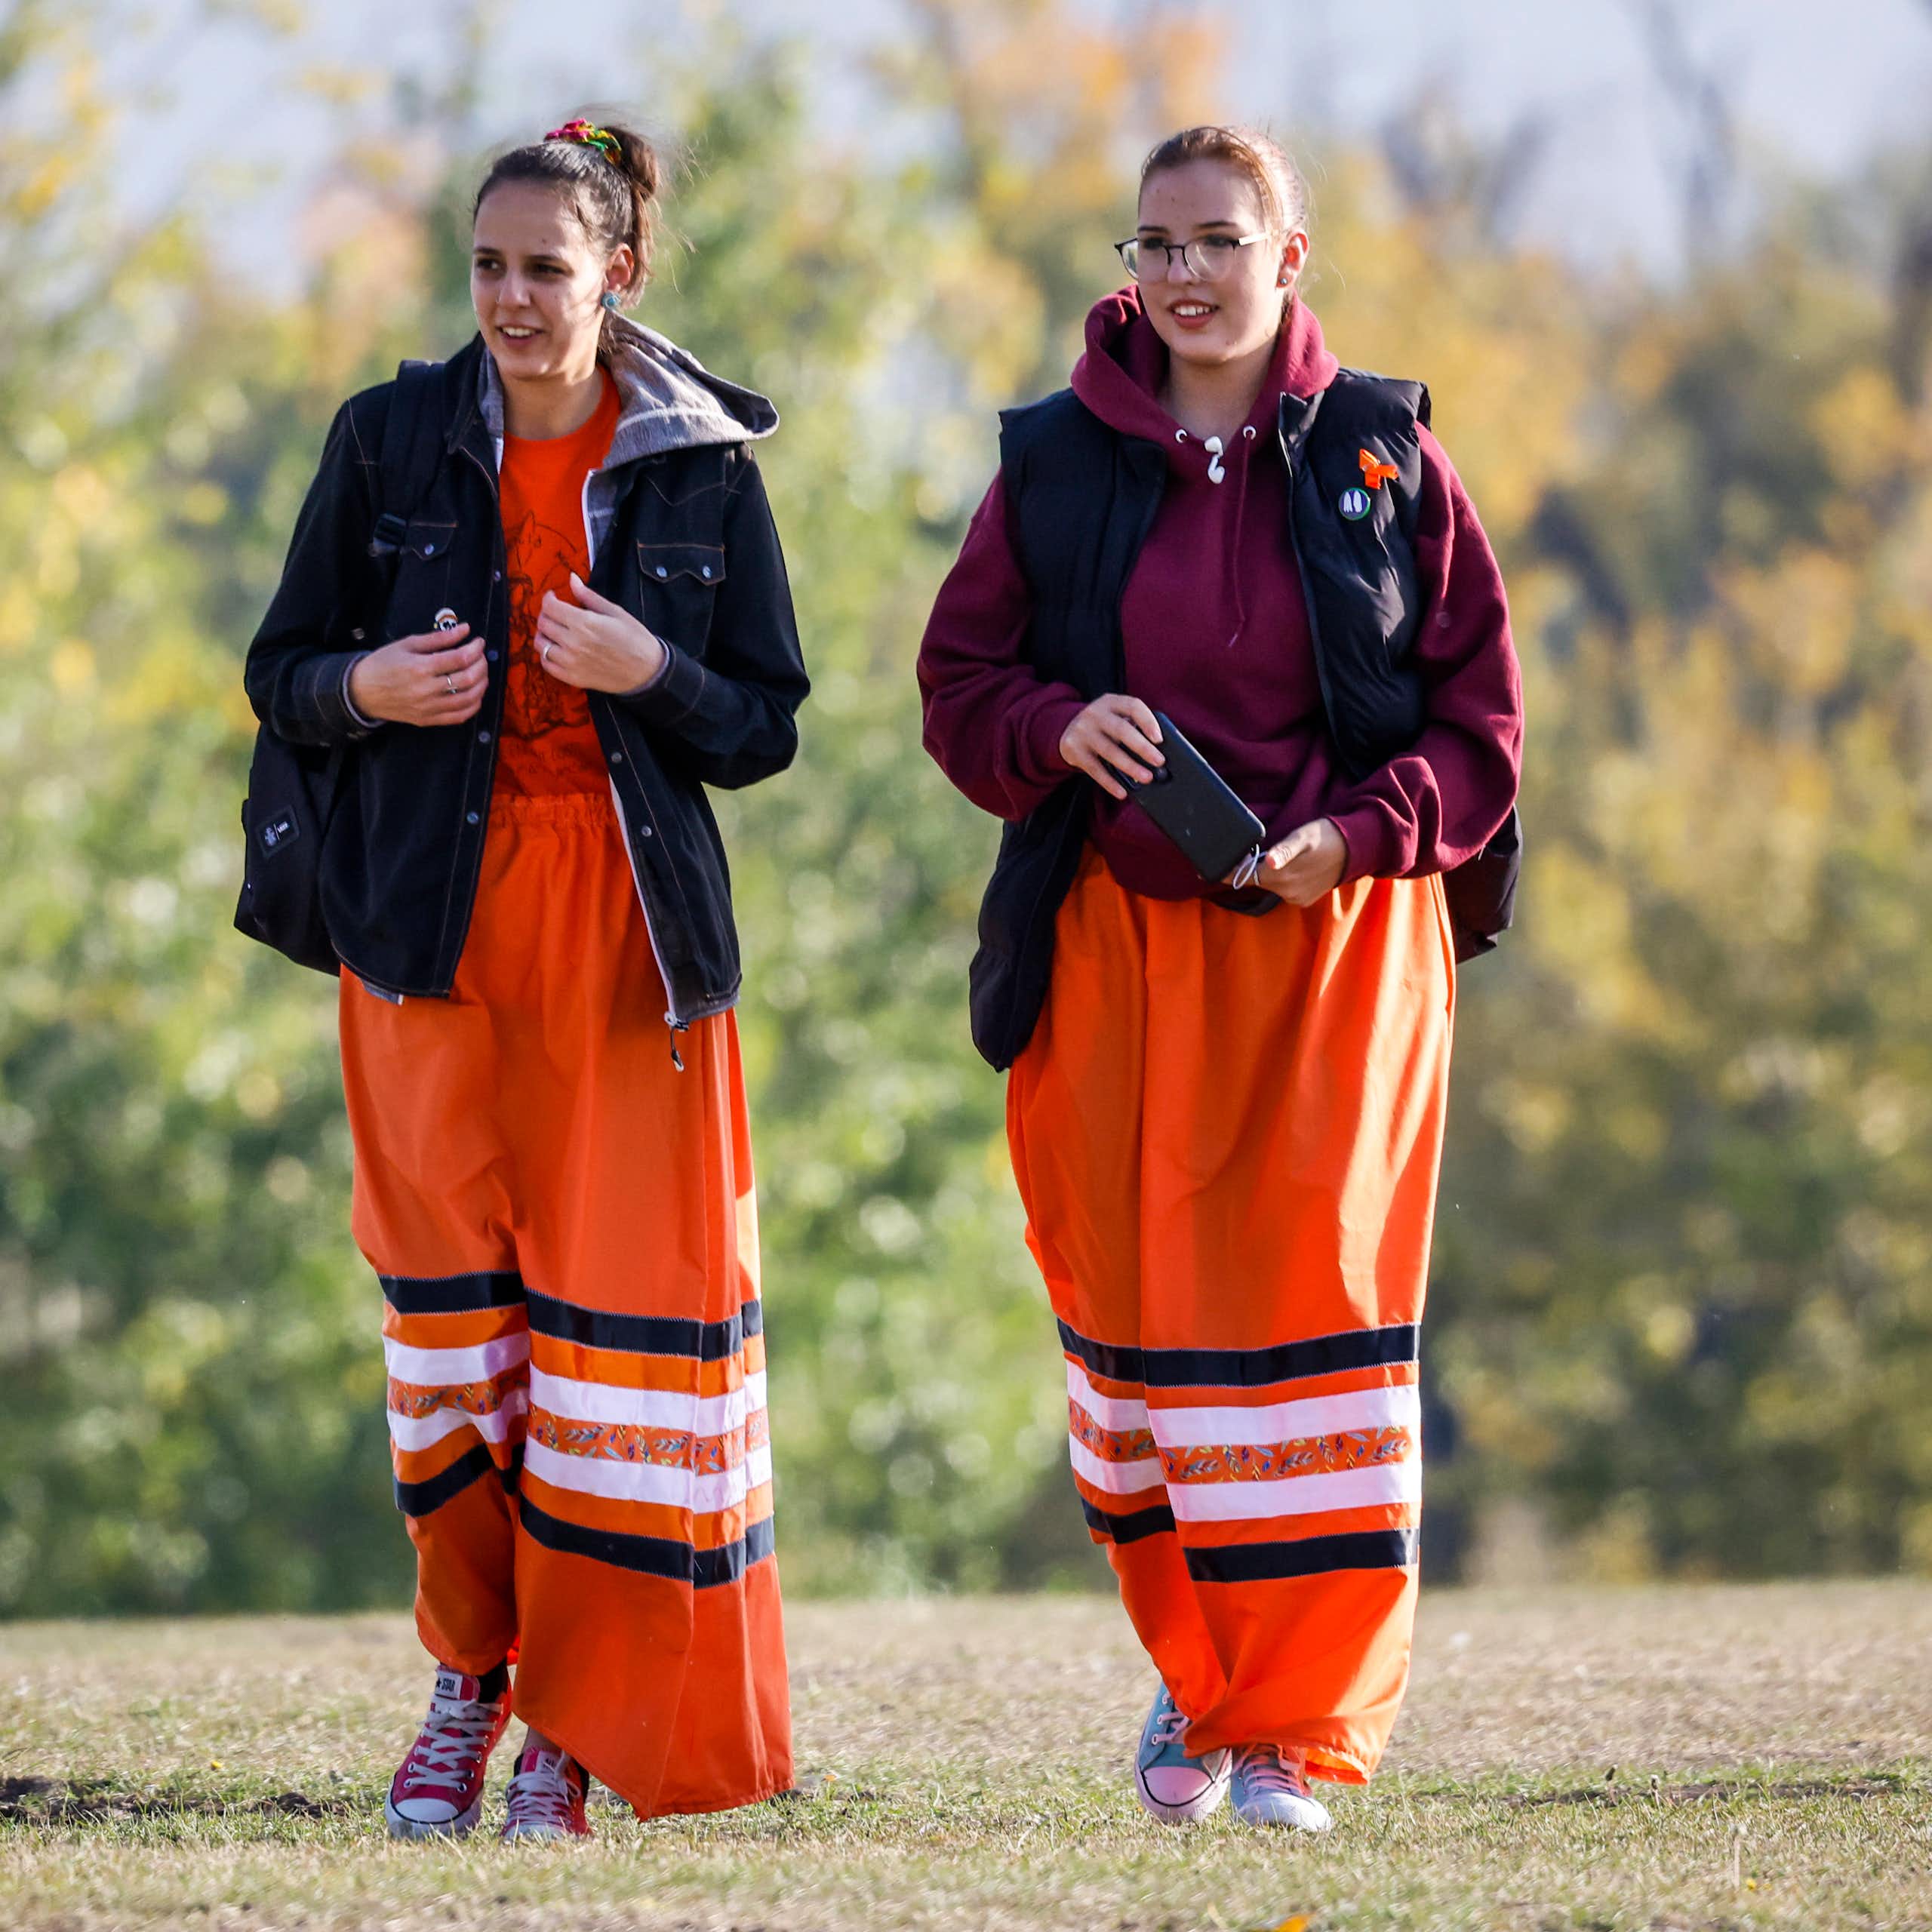 Two young women walk side by side wearing orange ribbon skirts and black jackets in an open green area